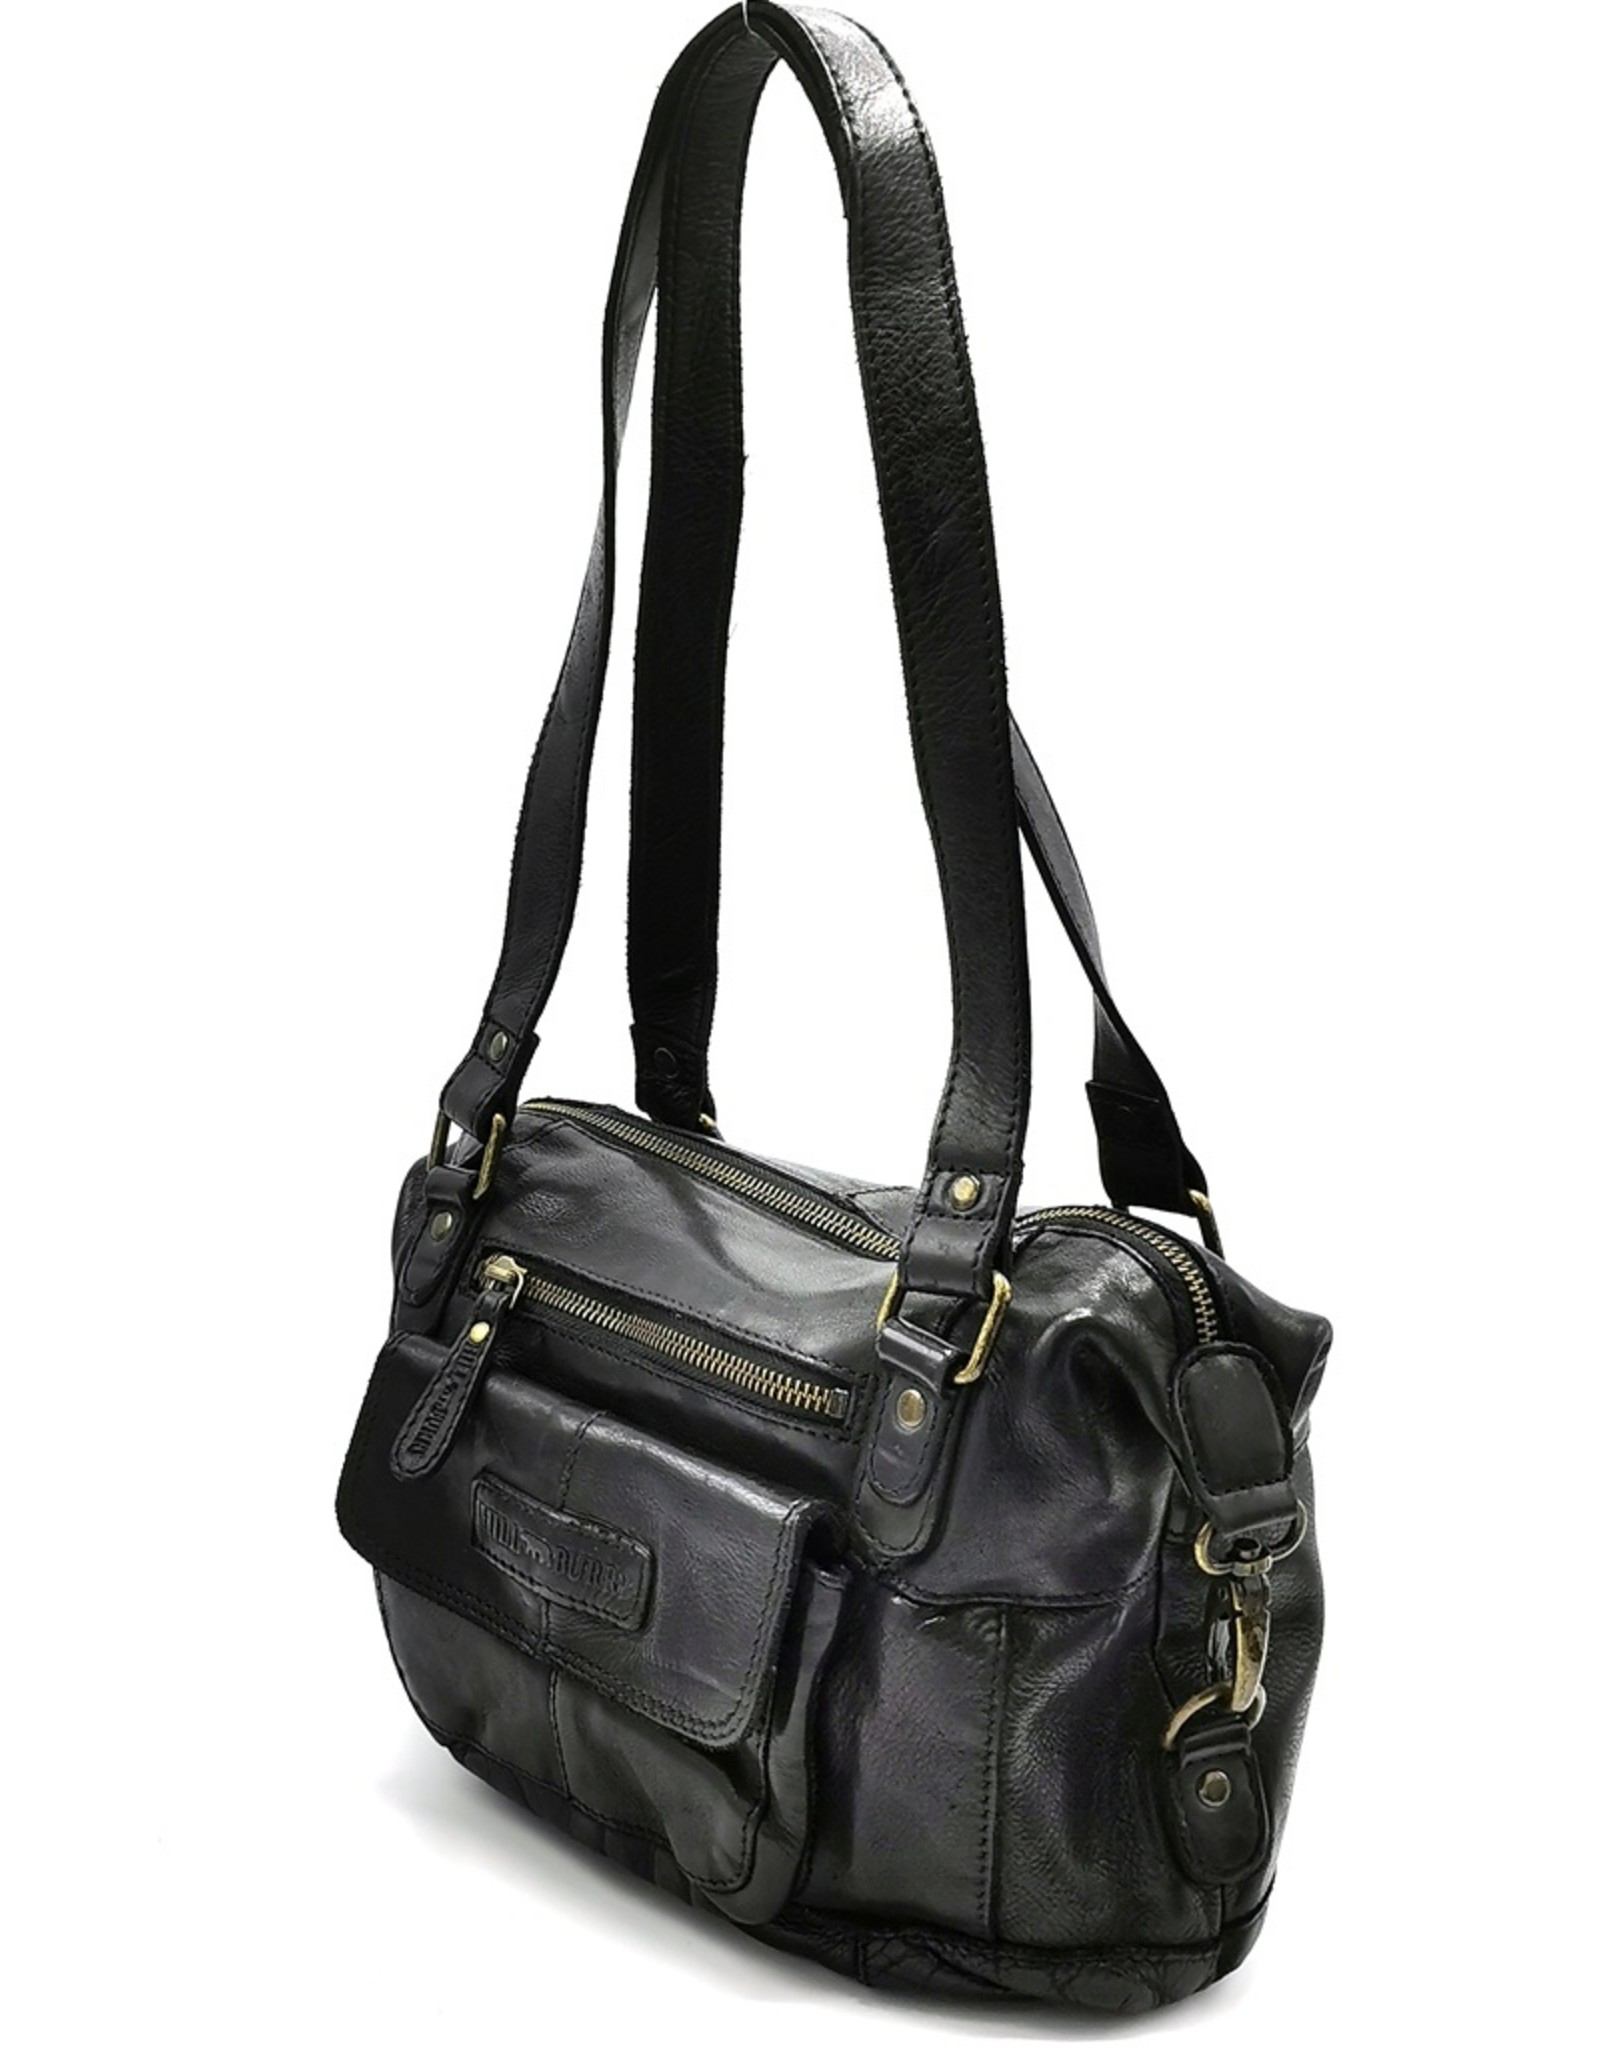 HillBurry Leather Shoulder bags  leather crossbody bags - HillBurry Shoulder Bag Washed Leather black